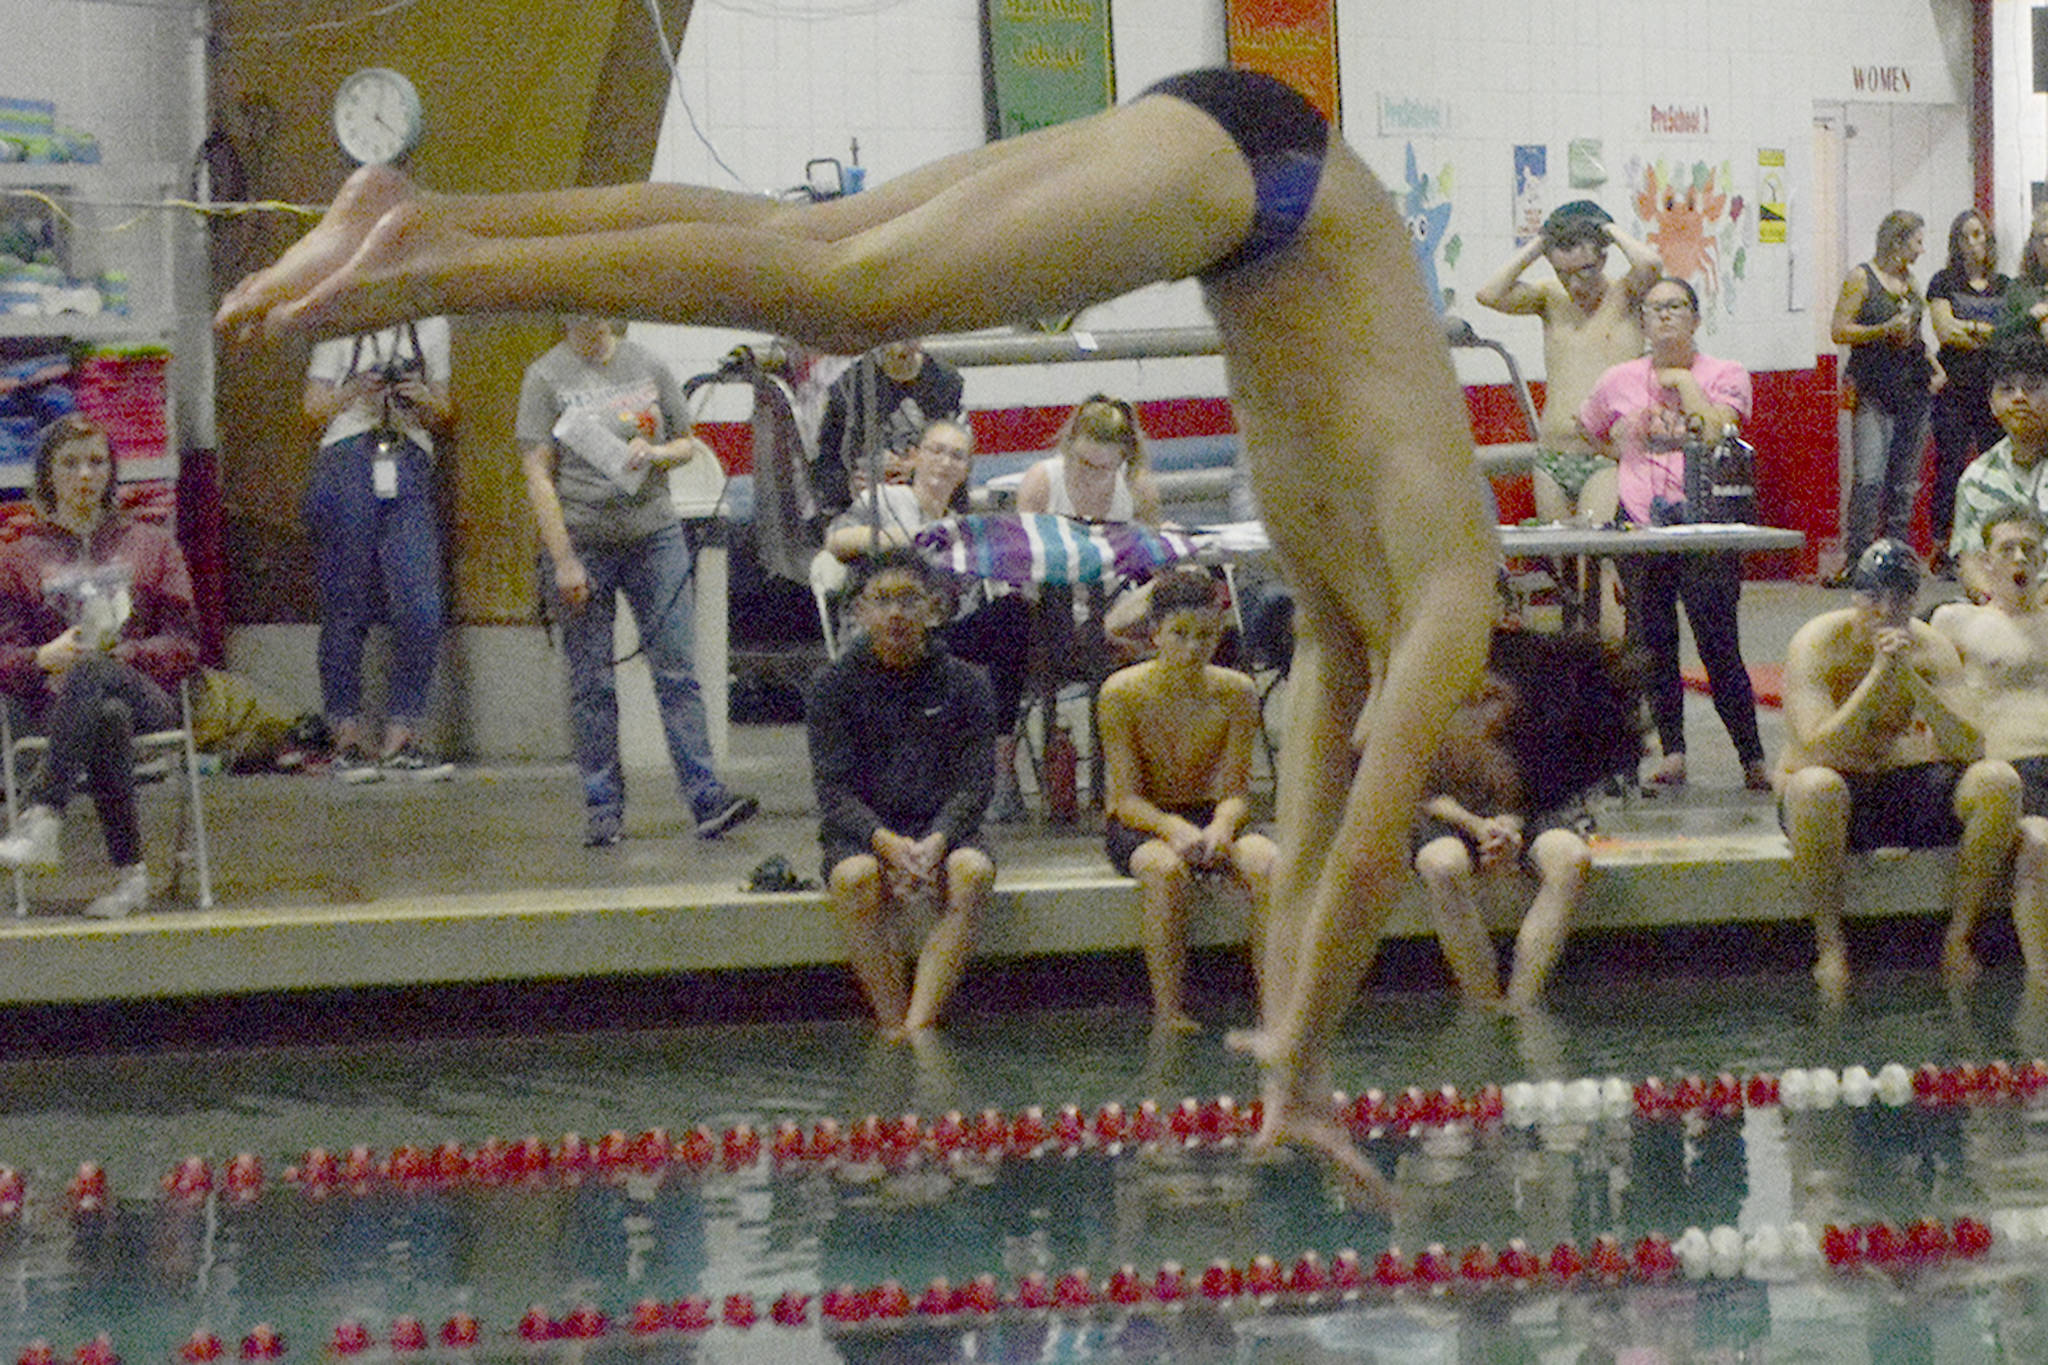 Marysville diver breaks 21-year-old record